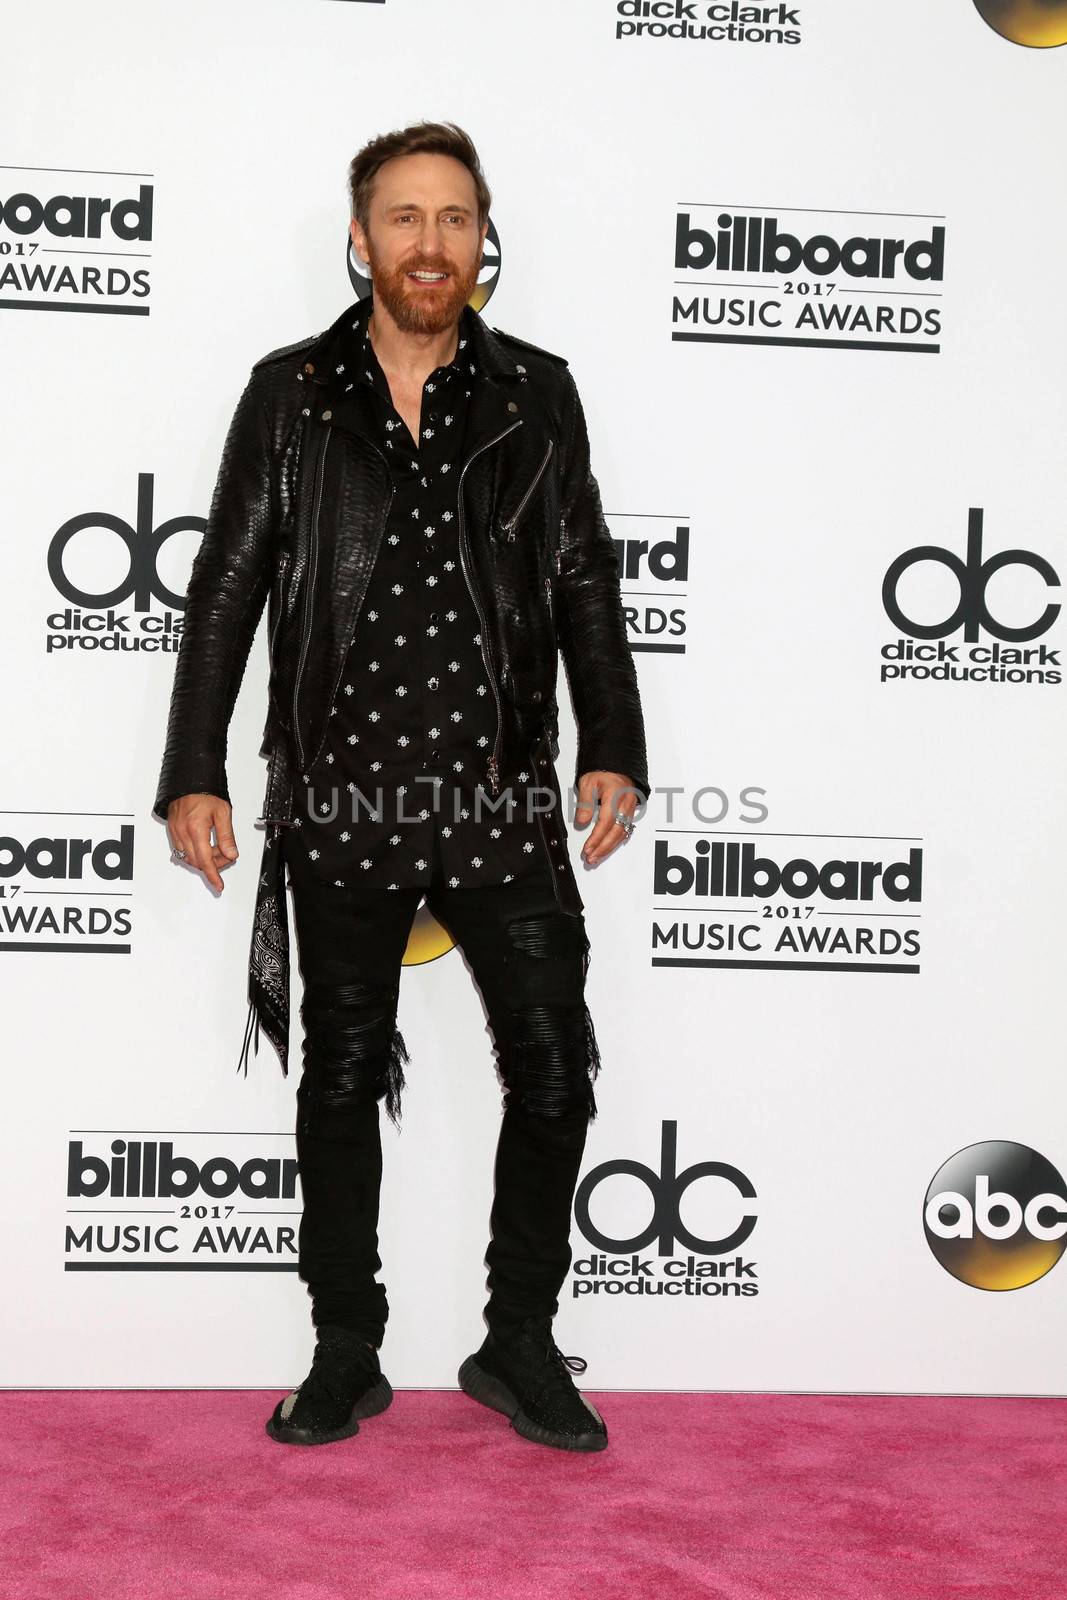 David Guetta
at the 2017 Billboard Awards Press Room, T-Mobile Arena, Las Vegas, NV 05-21-17/ImageCollect by ImageCollect